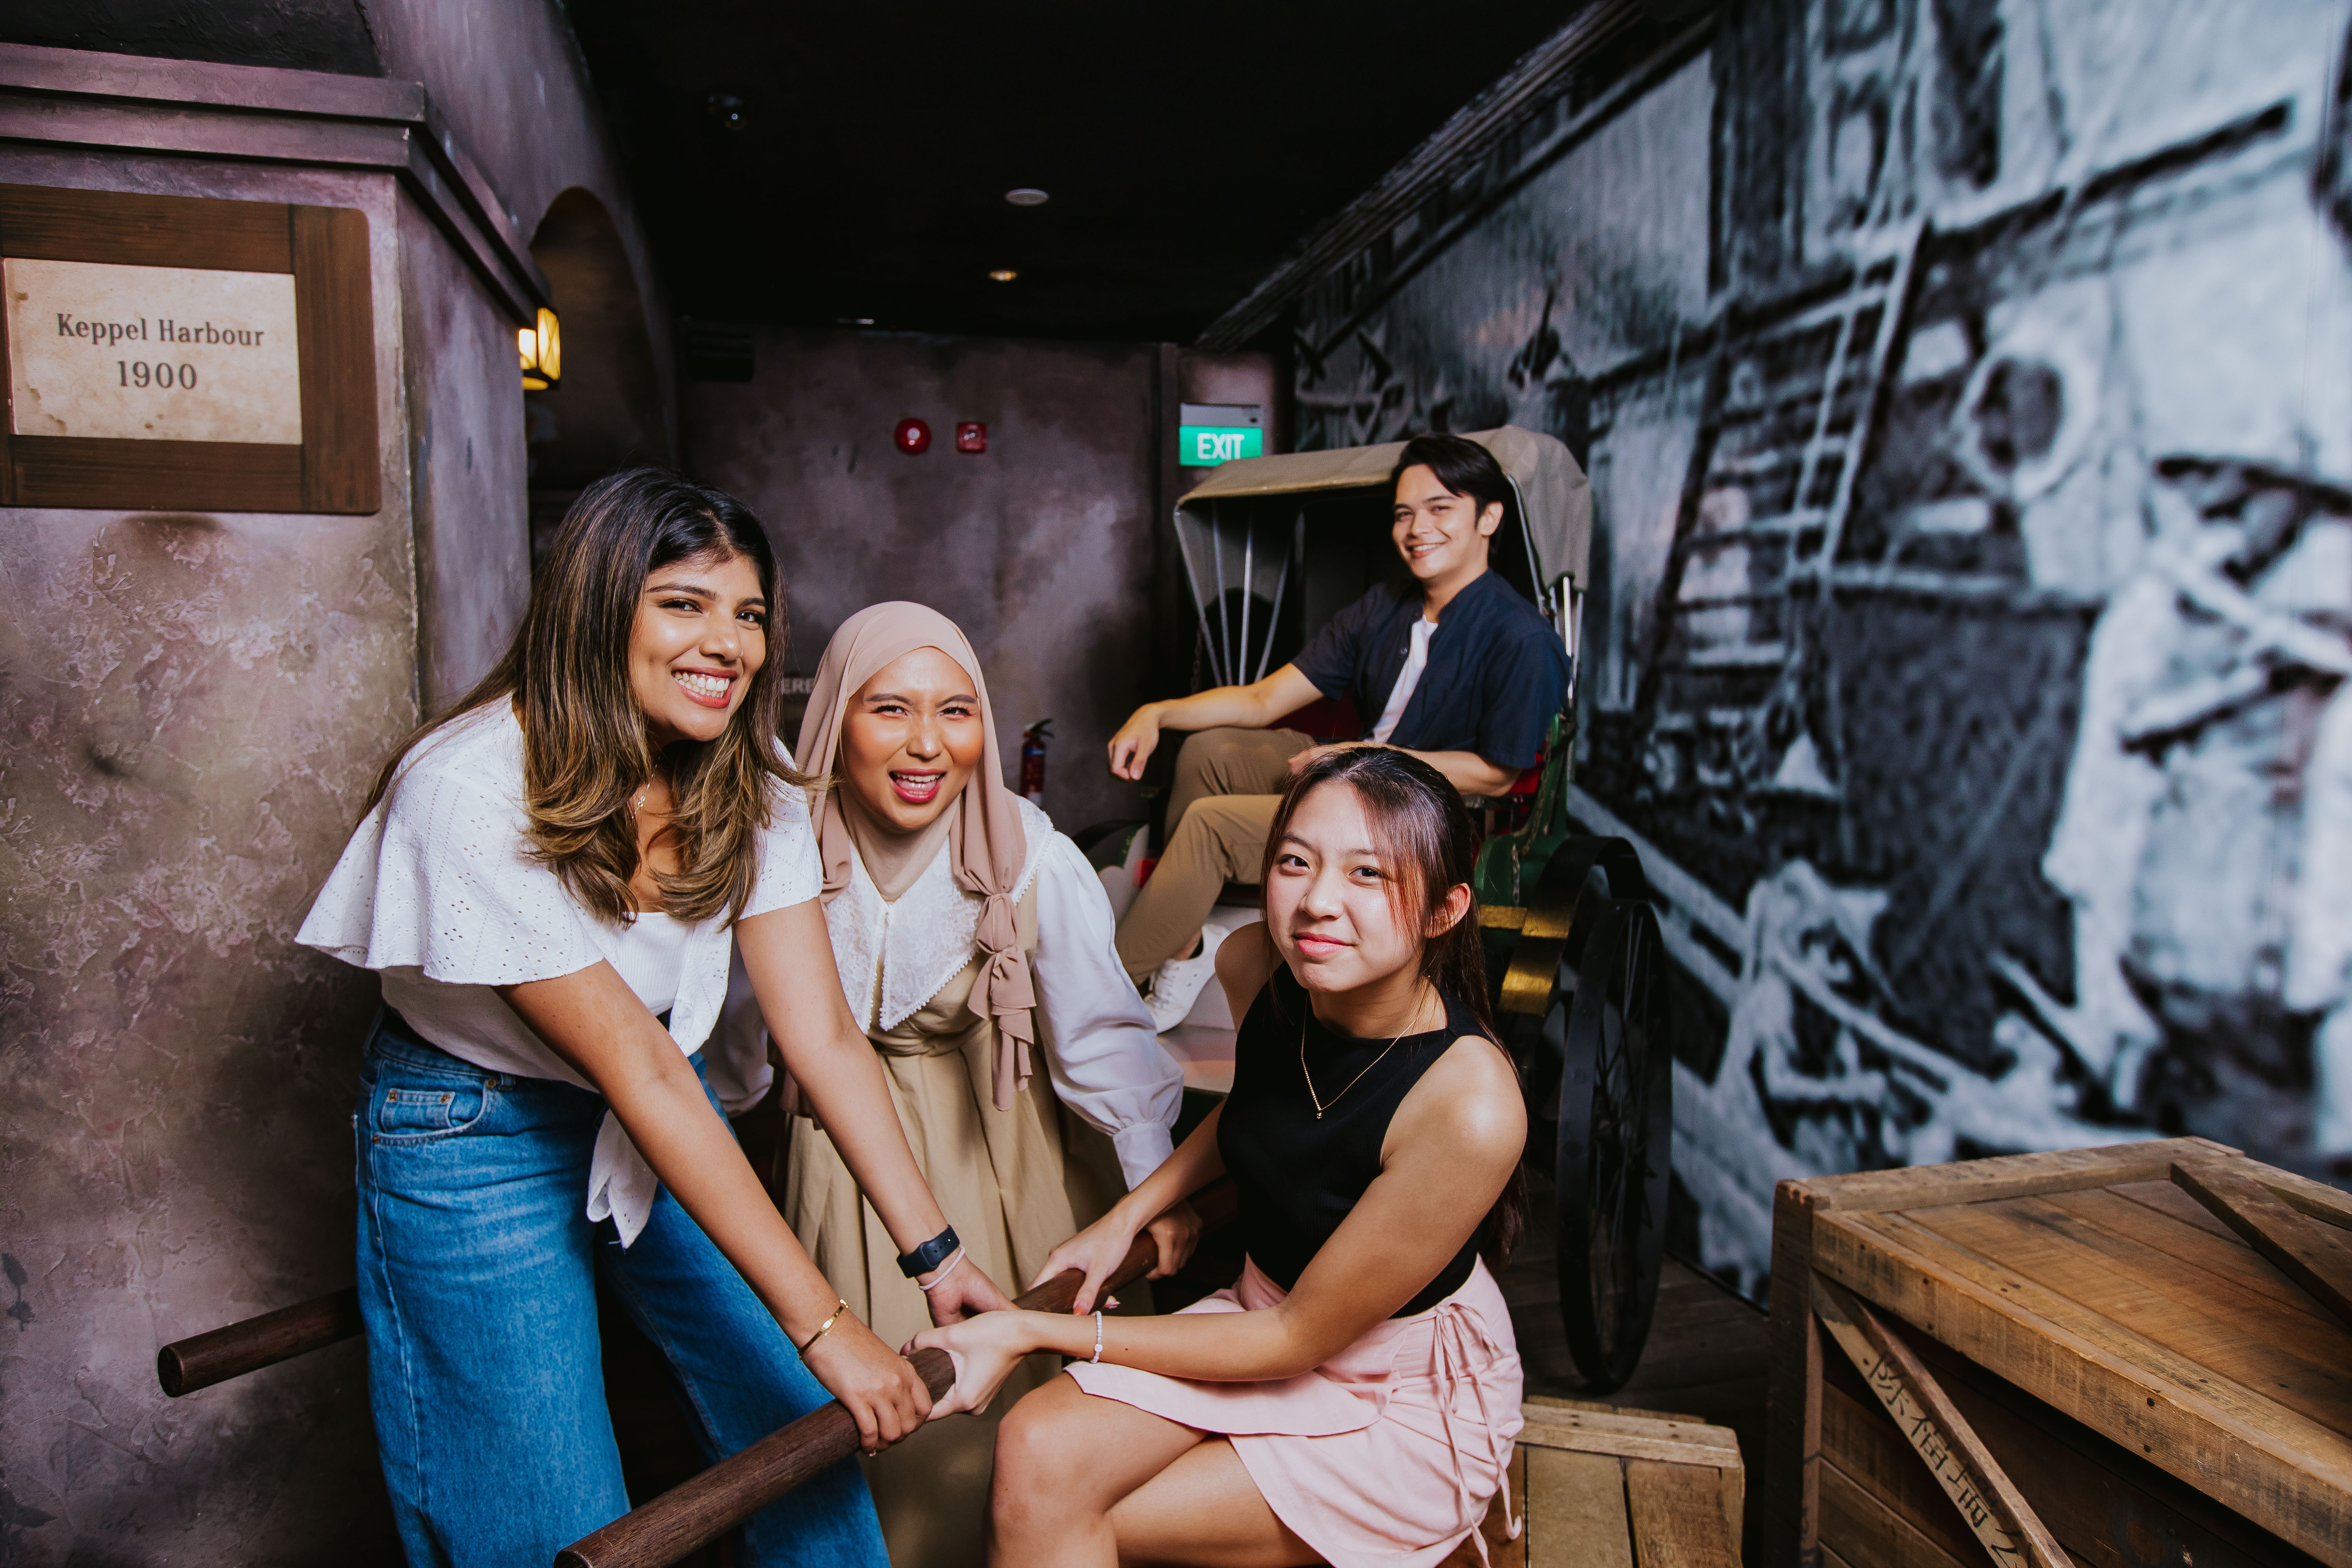 As part of Images of Singapore exhibition in Madame Tussauds, 3 girls pretended to pull a rickshaw as a pose for a photo. A guy sat on a the rickshaw seat.